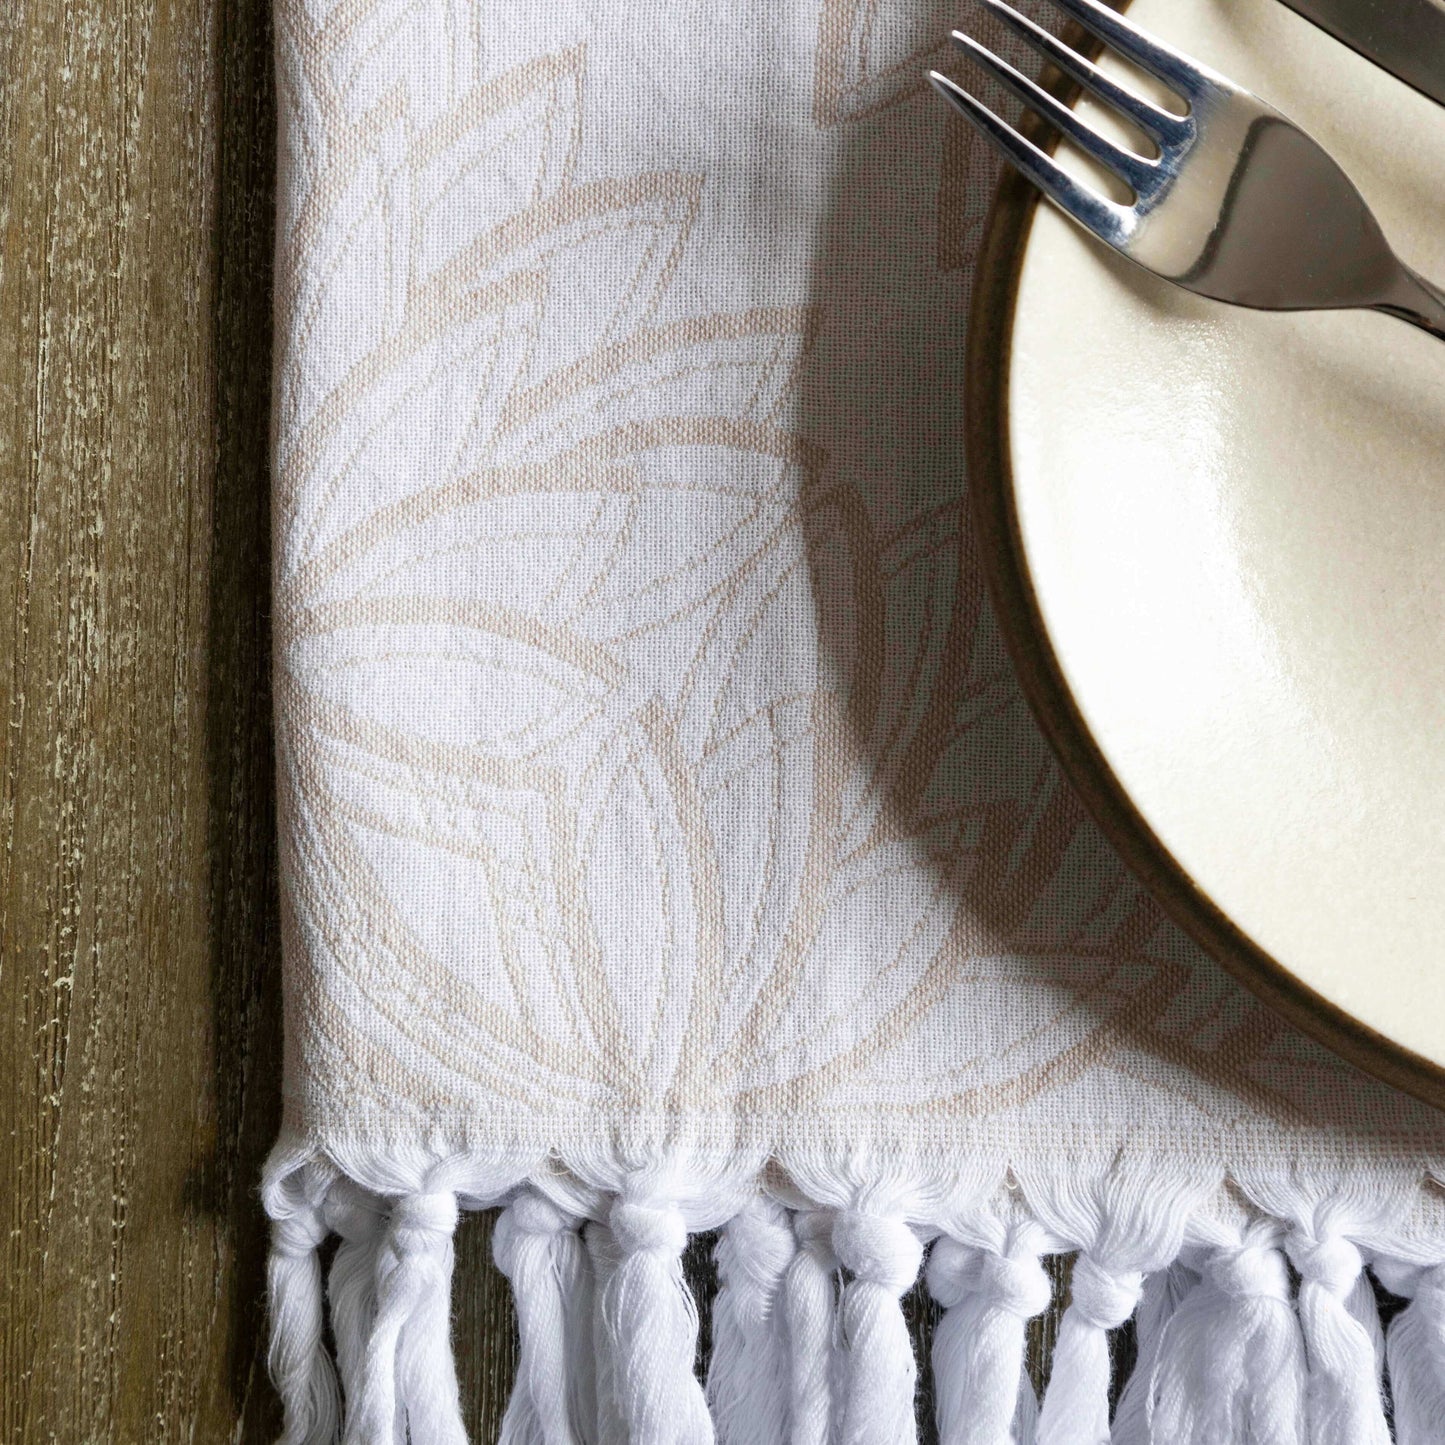 Turkish towel with a plate